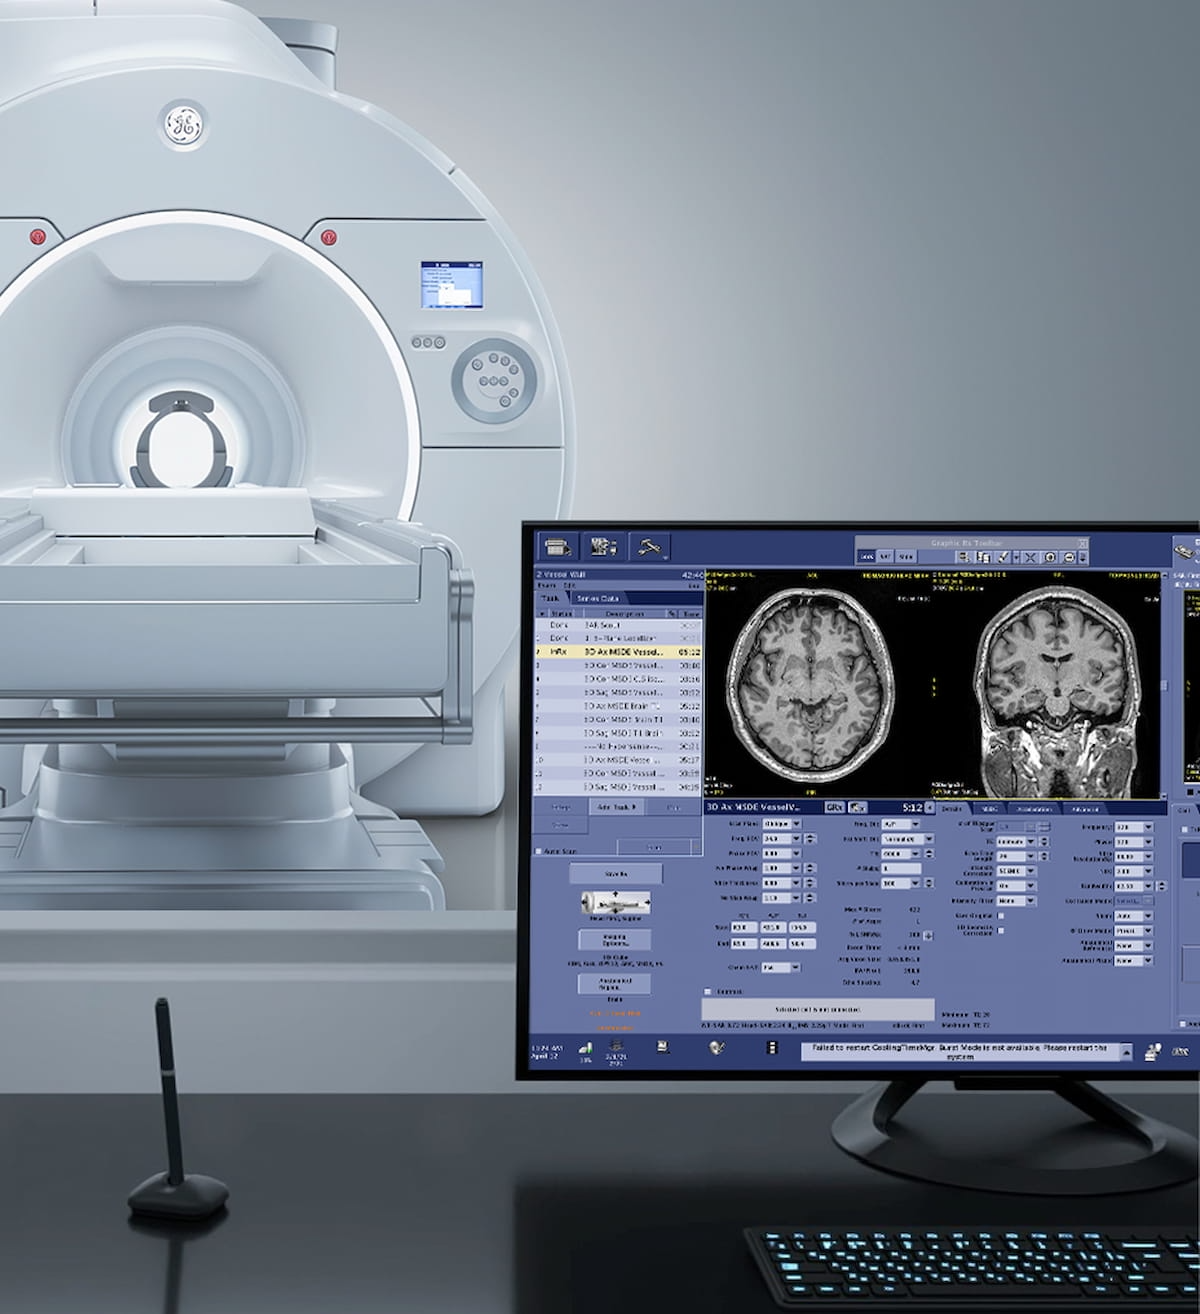 Reportedly offering enhanced imaging detail of the brain’s function, microstructure, and microvasculature, the head-only 3T MRI system Signa Magnus provides higher b-value diffusion with short echo times, according to GE HealthCare, the manufacturer of the device. (Photo courtesy of GE HealthCare.)